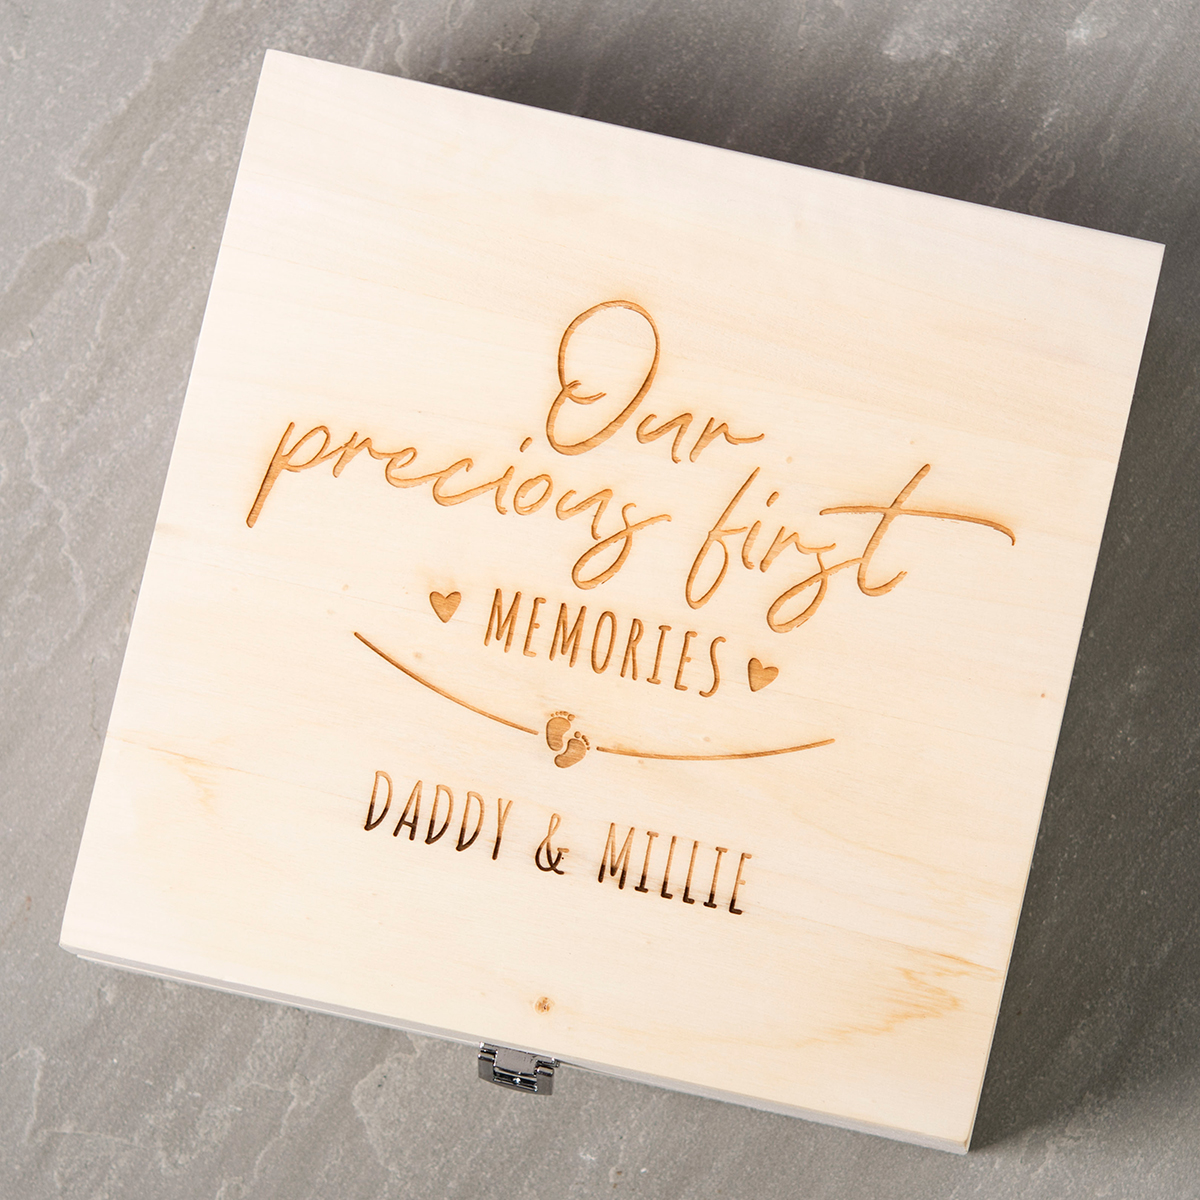 Personalised Storage Box - Our Precious First Memories